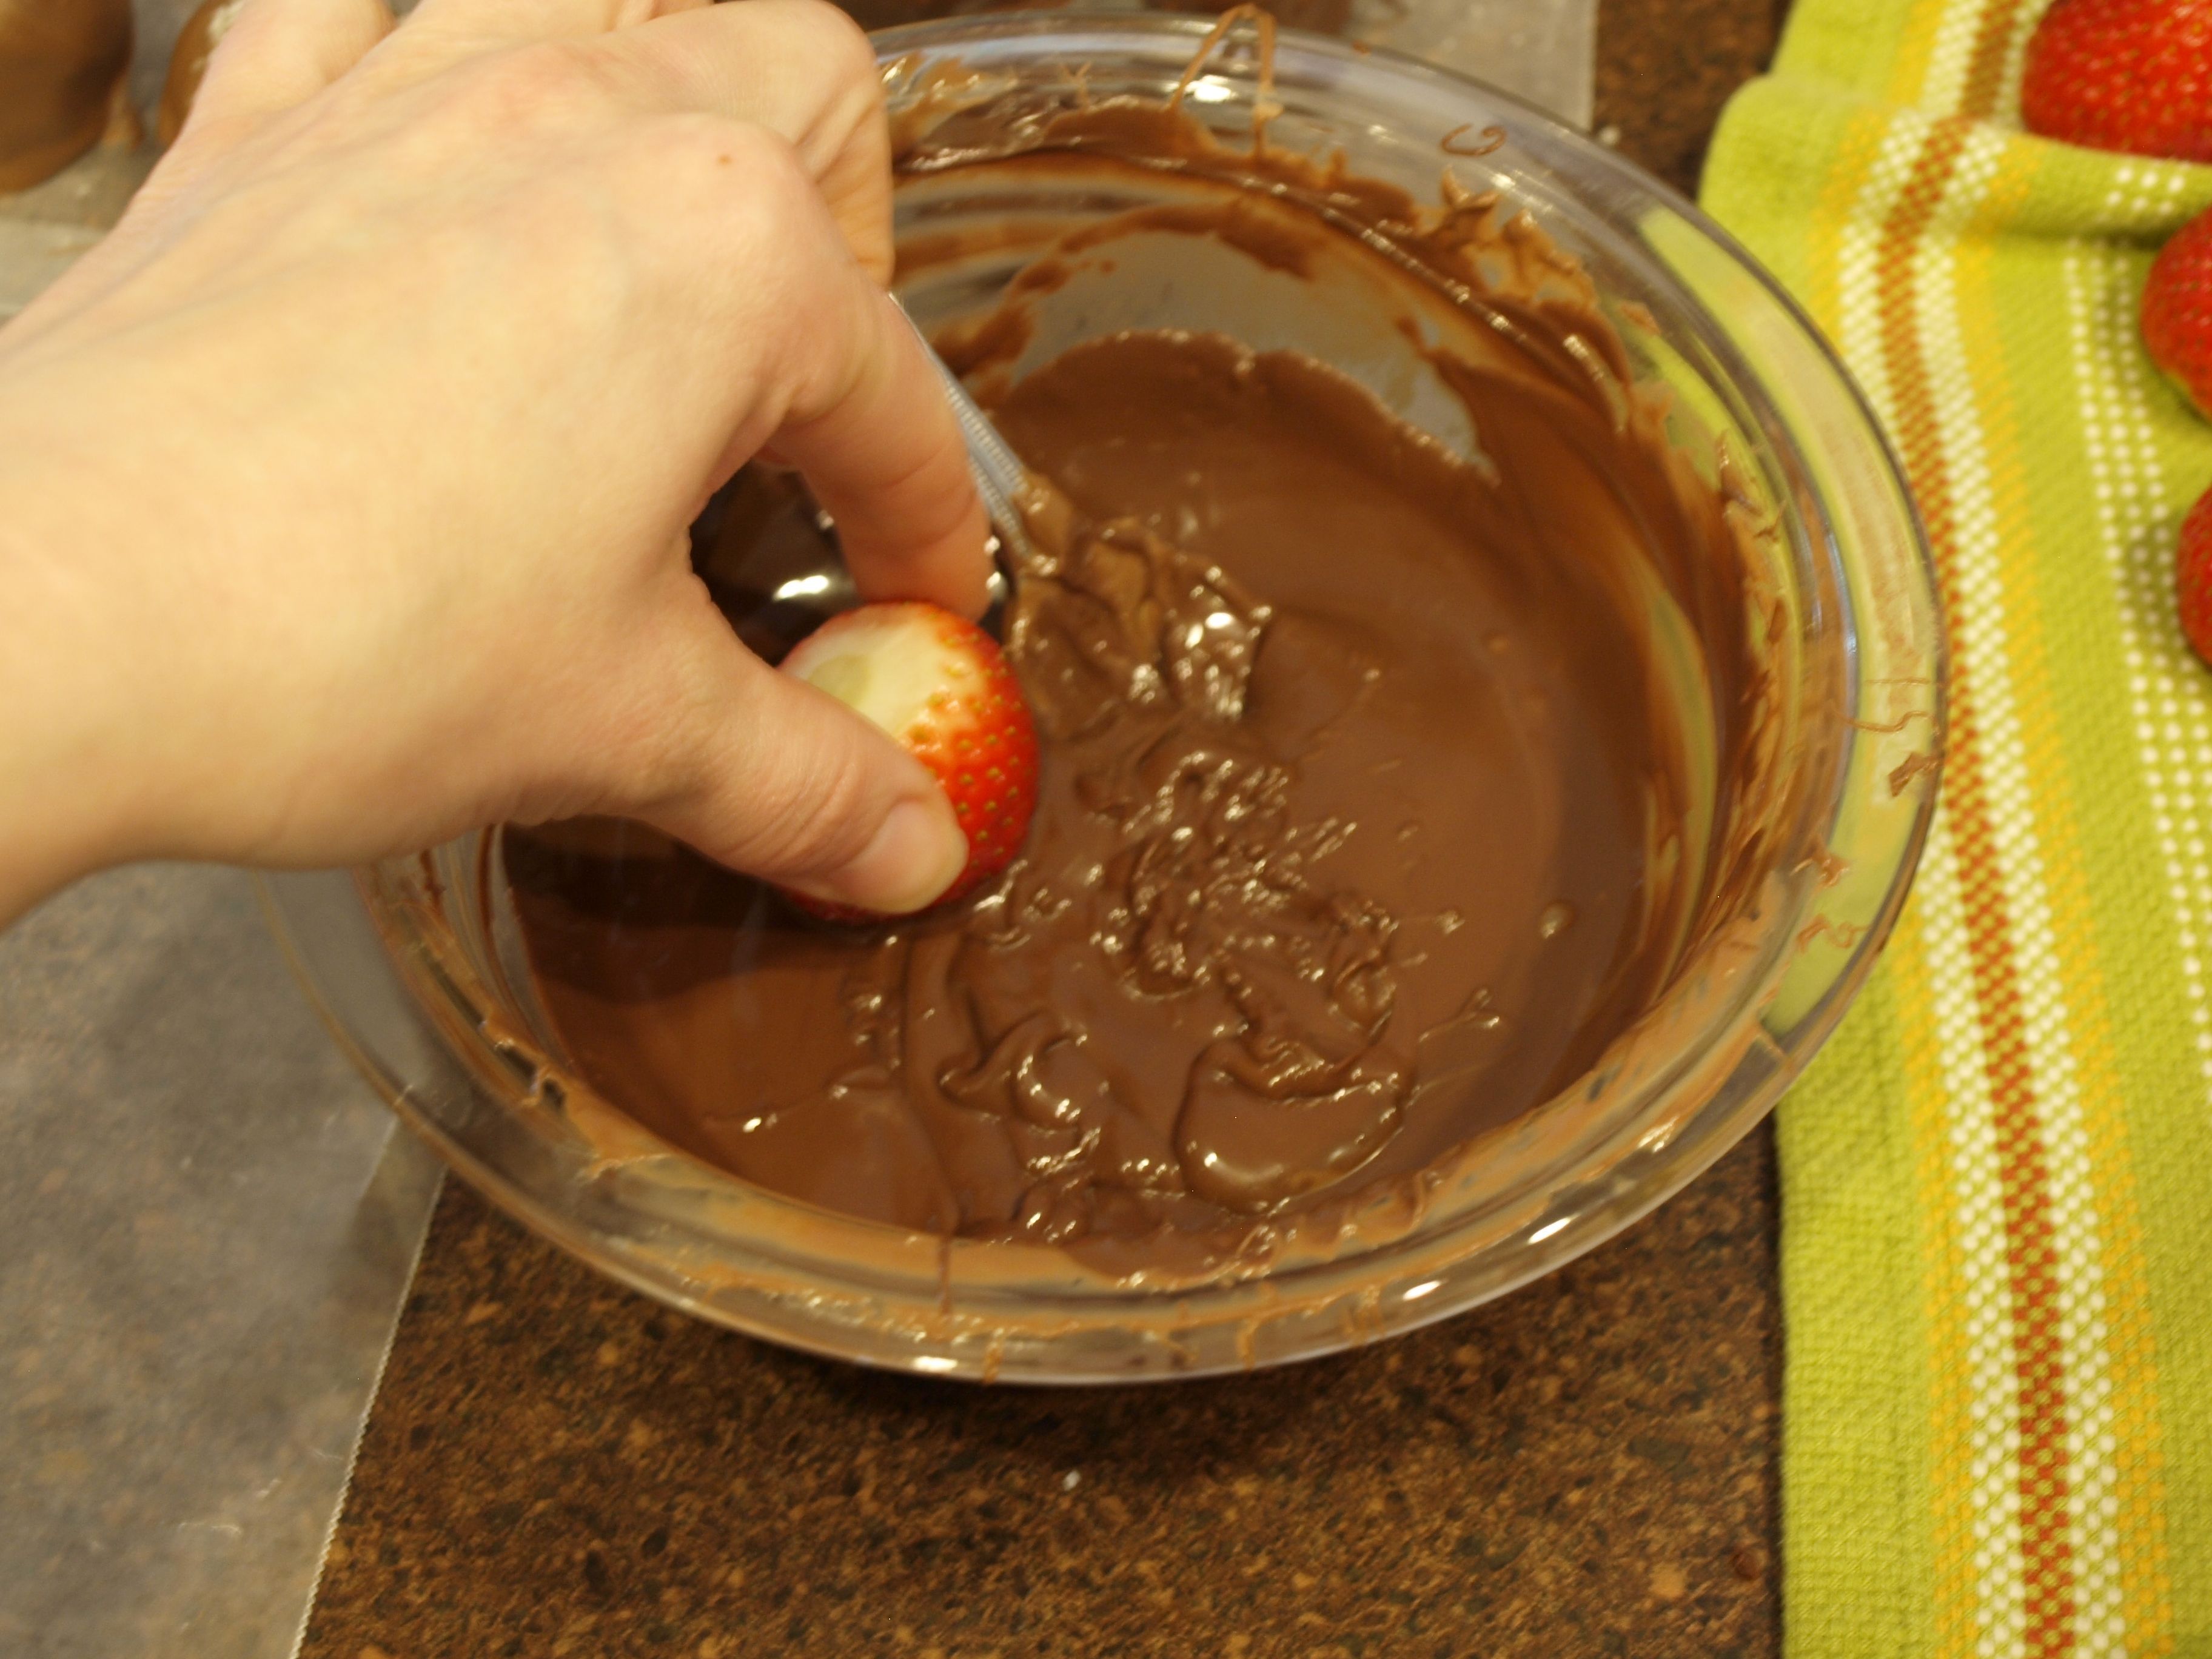 4. Dip half the strawberries in chocolate -   How to Create a Chocolate Tree